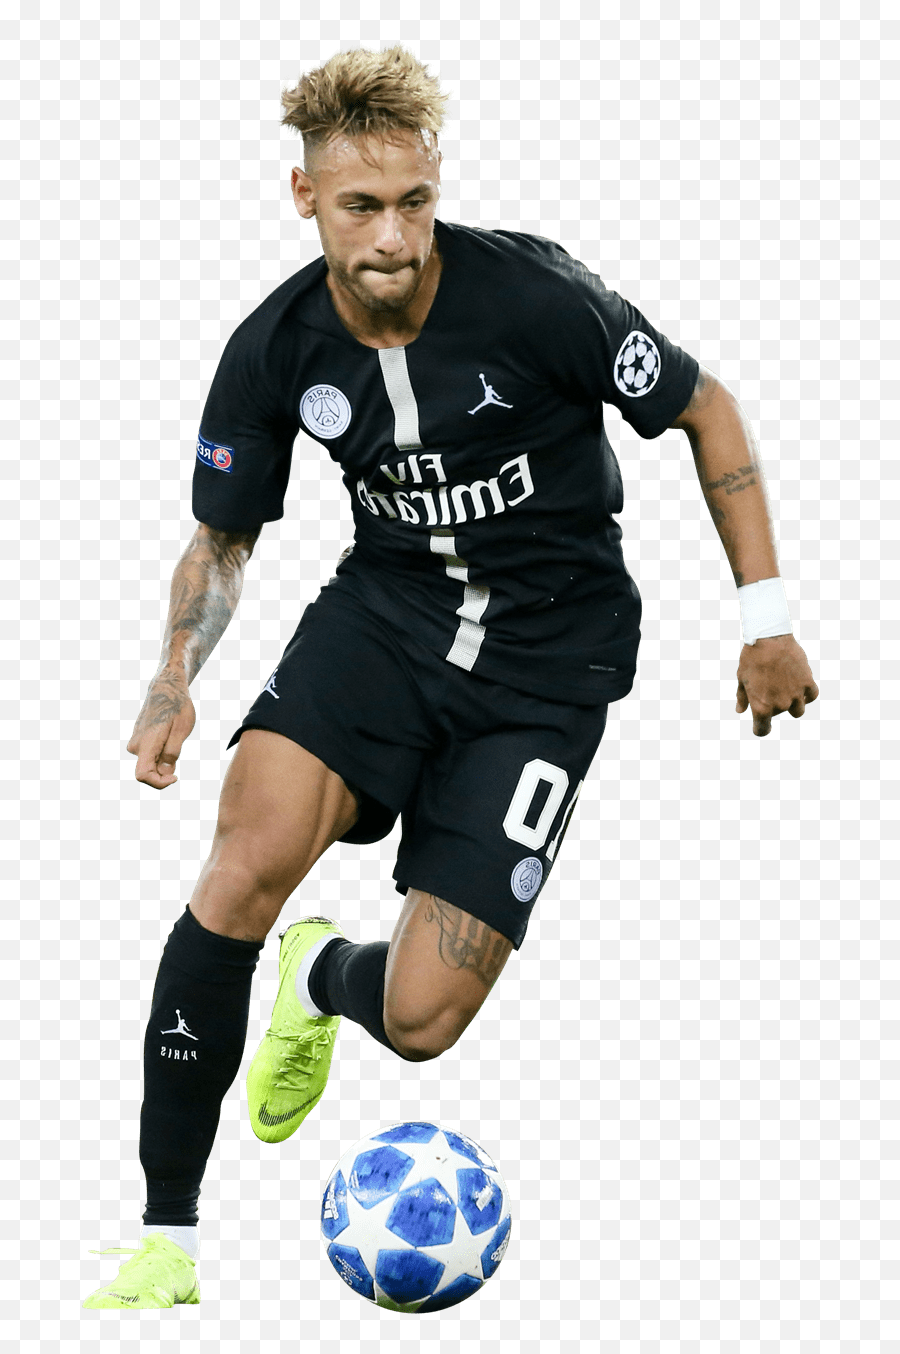 Download Neymar Png Transparent Background Image For Free - Football Player,Neymar Png